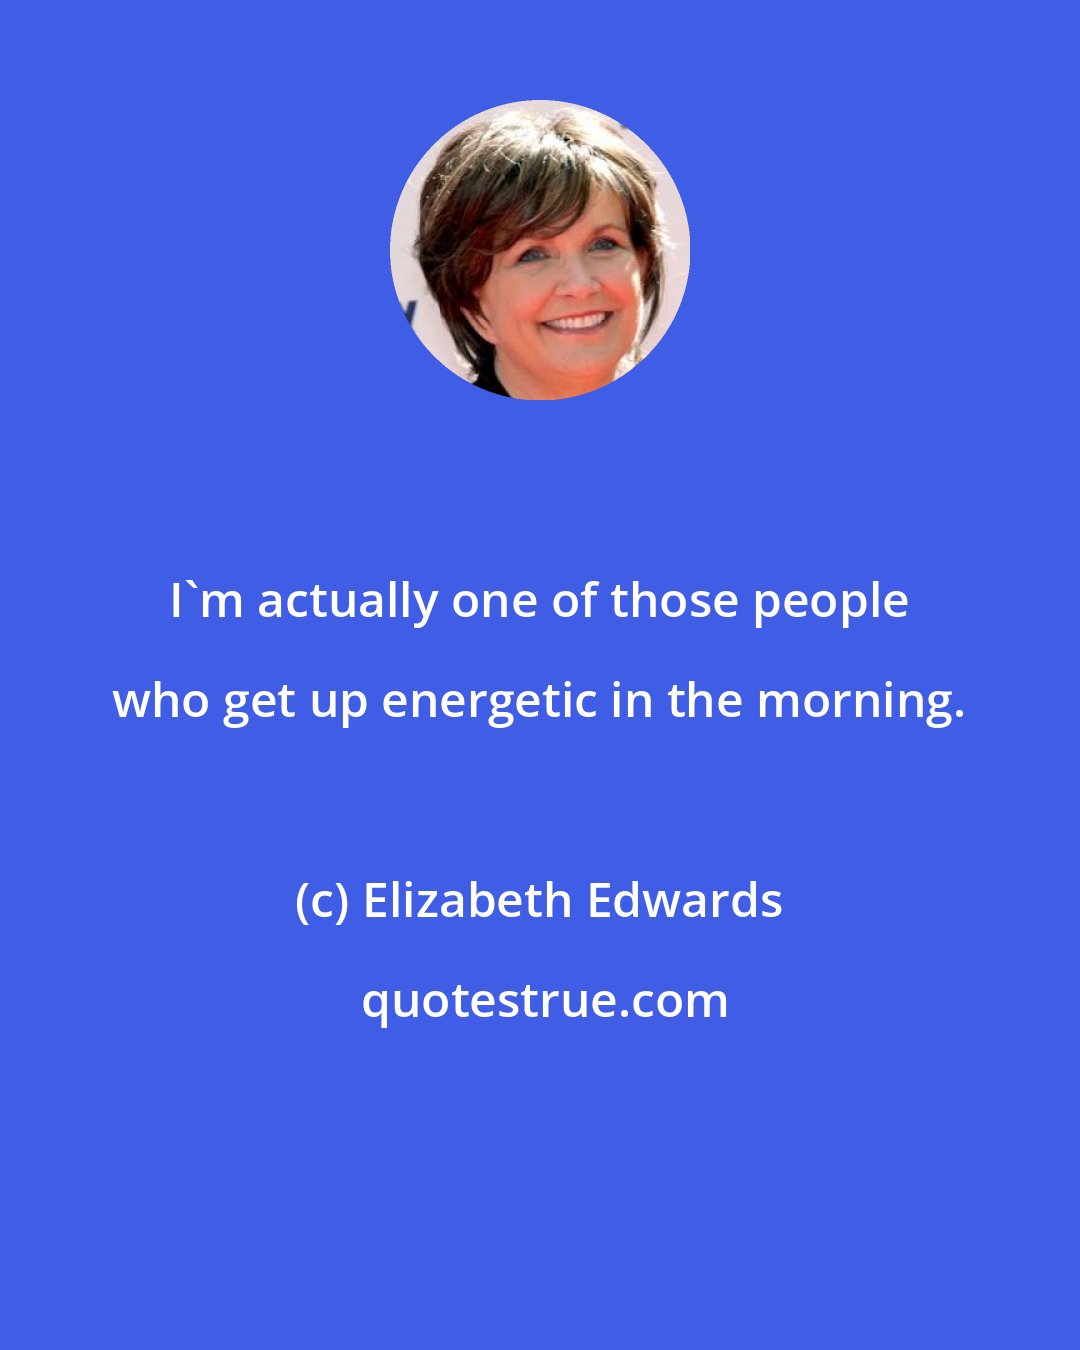 Elizabeth Edwards: I'm actually one of those people who get up energetic in the morning.